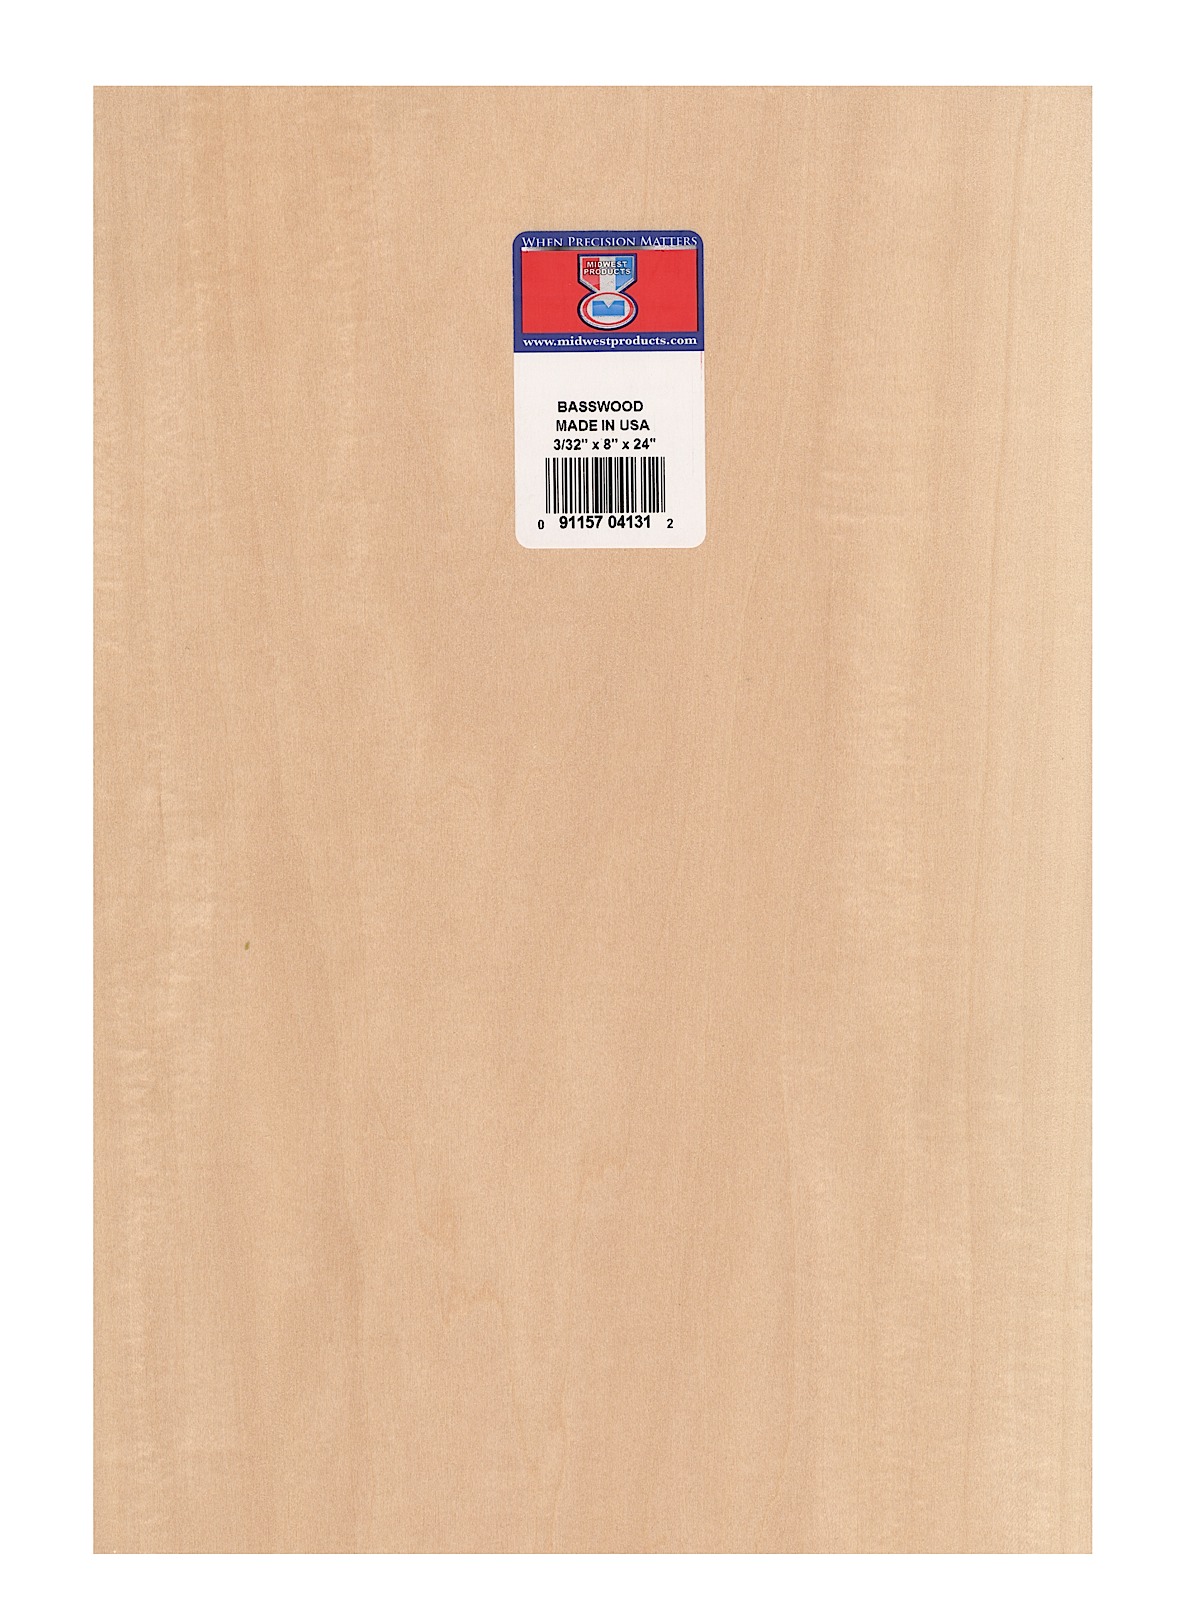 Basswood Sheets 3 32 In. 8 In. X 24 In.